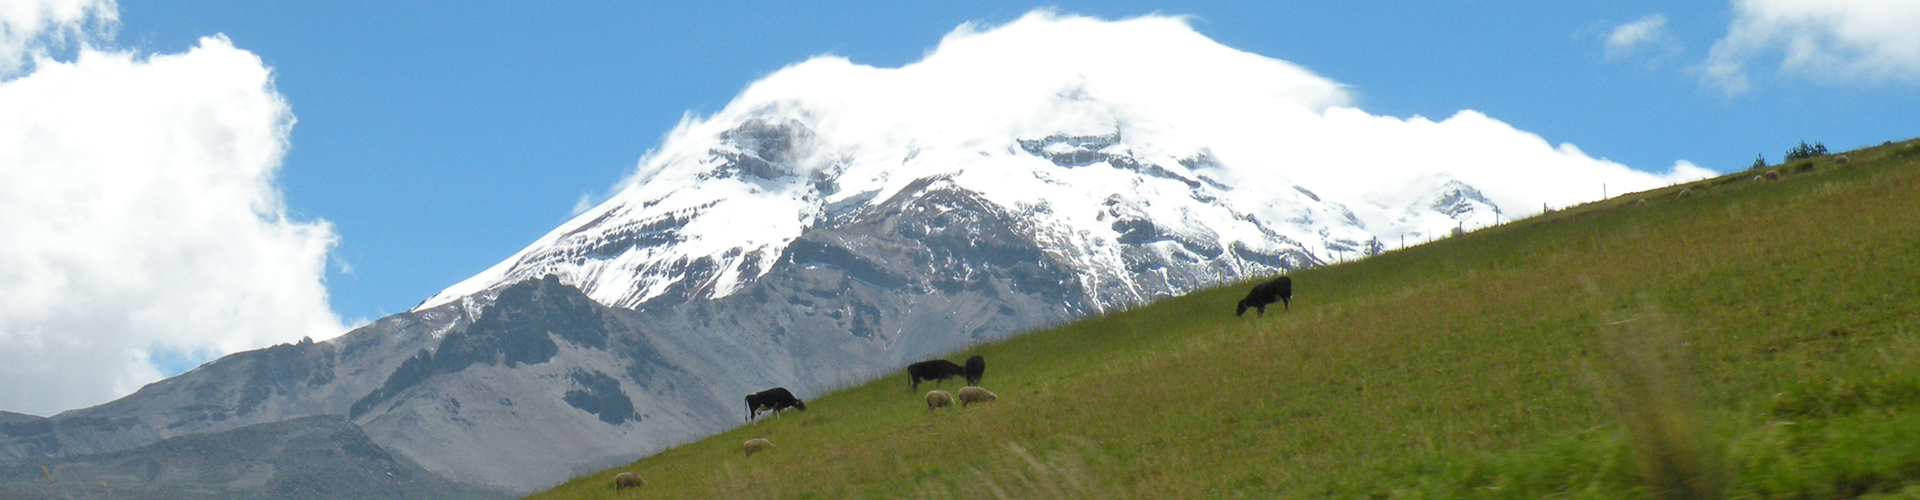 Cows and sheep on a grassy hill with Mount Chimborazo in the background